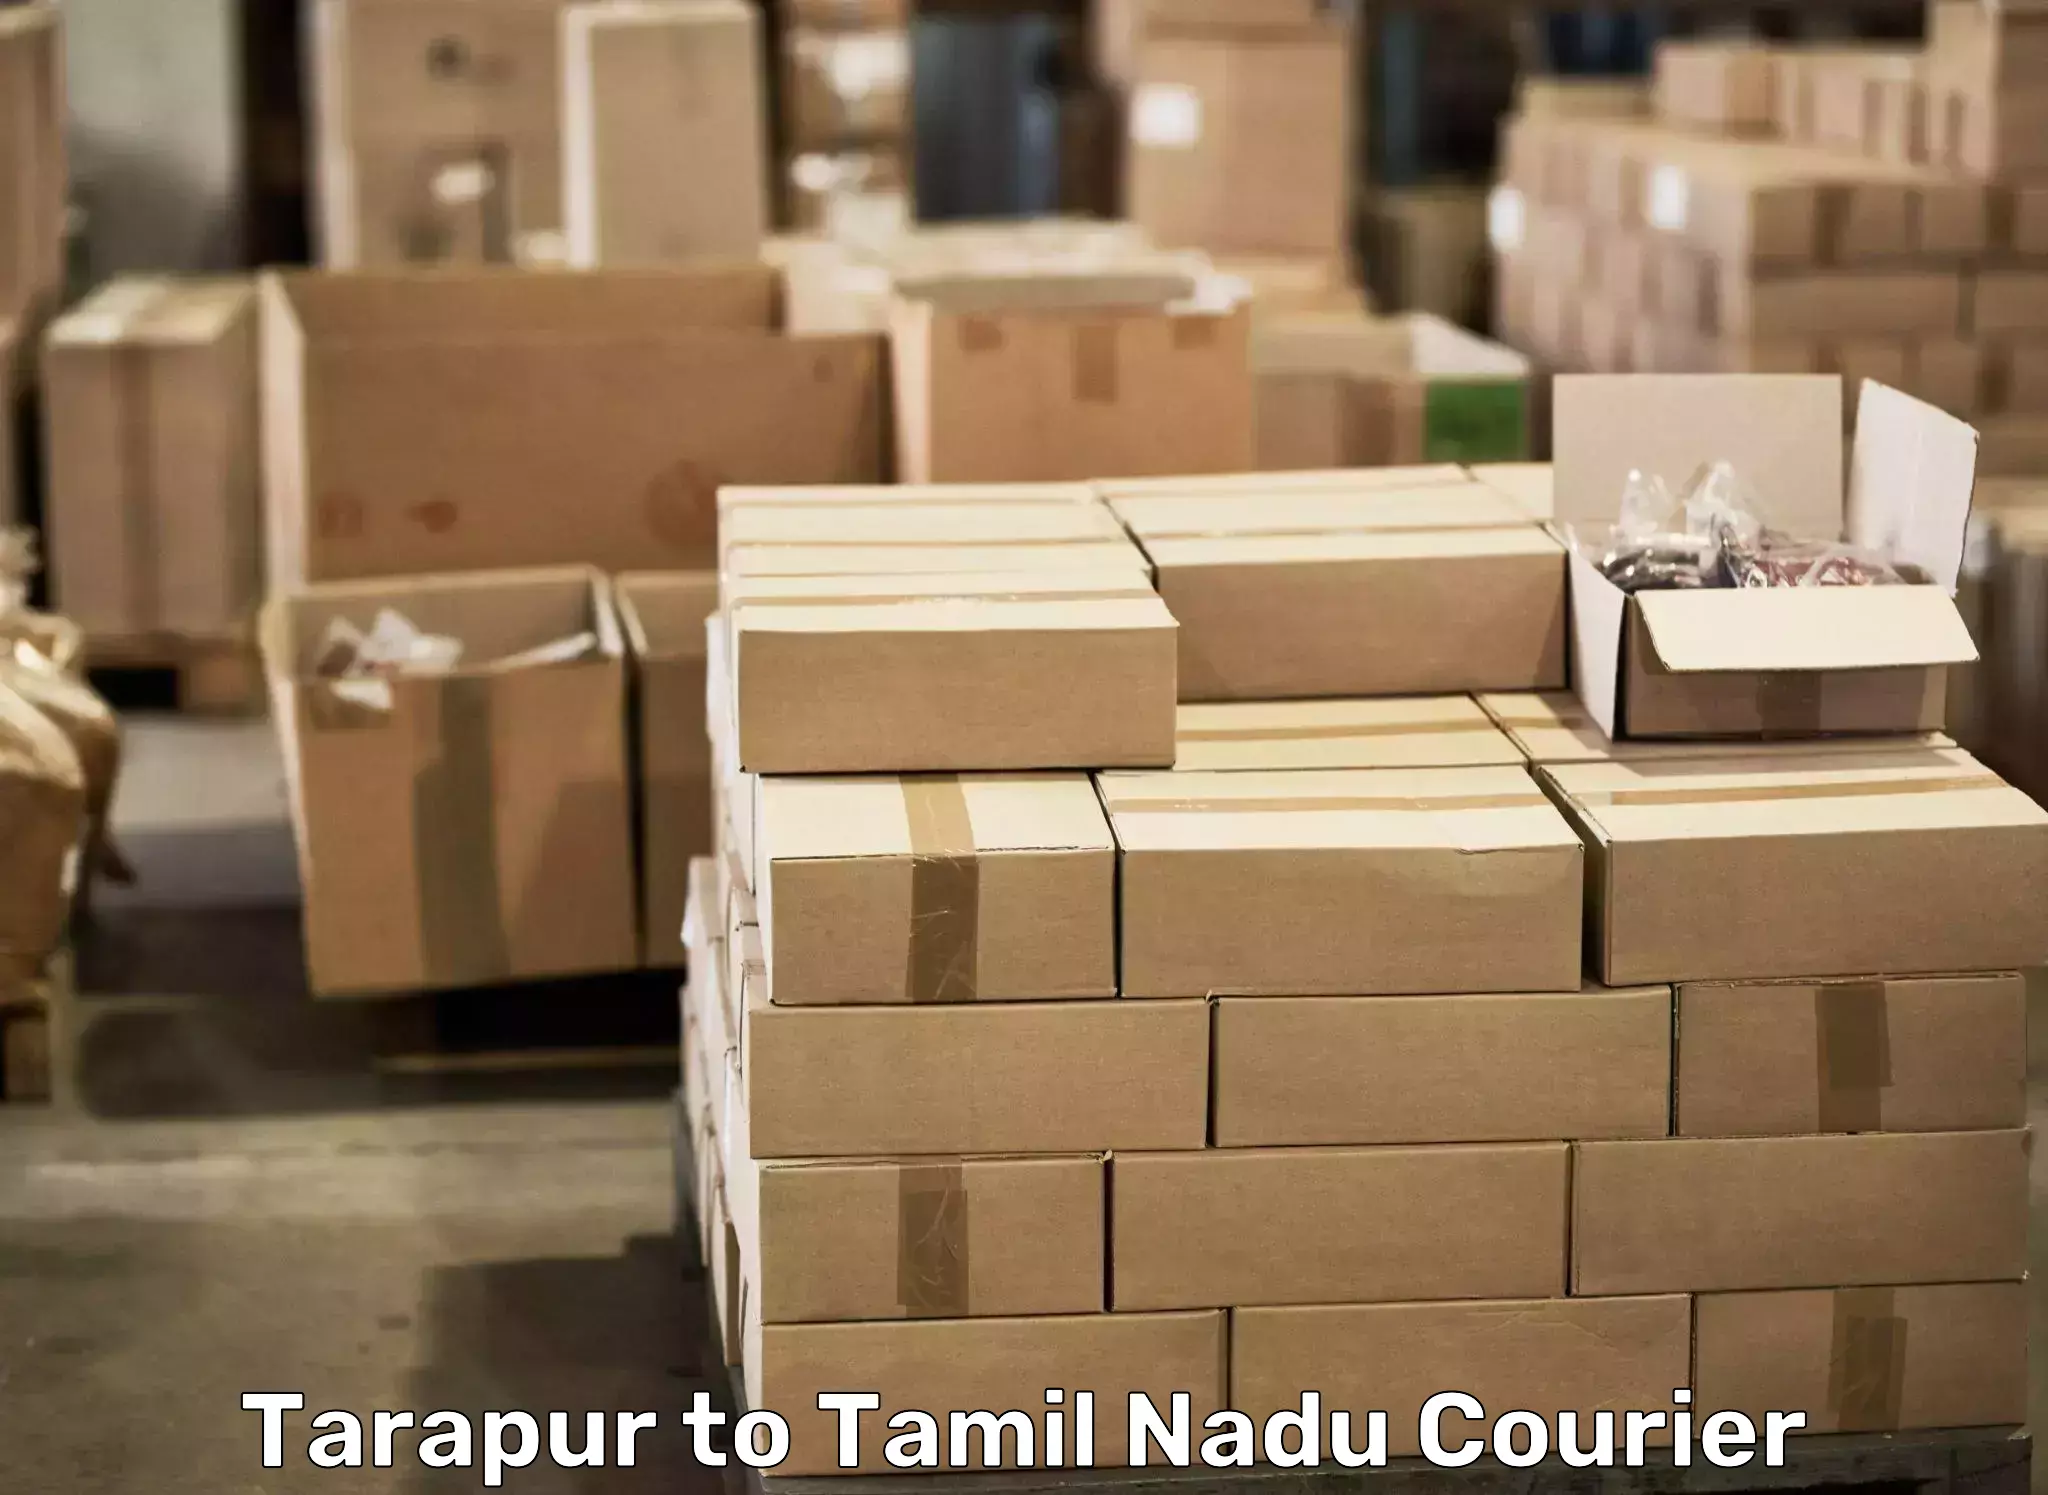 Full-service relocation Tarapur to Trichy